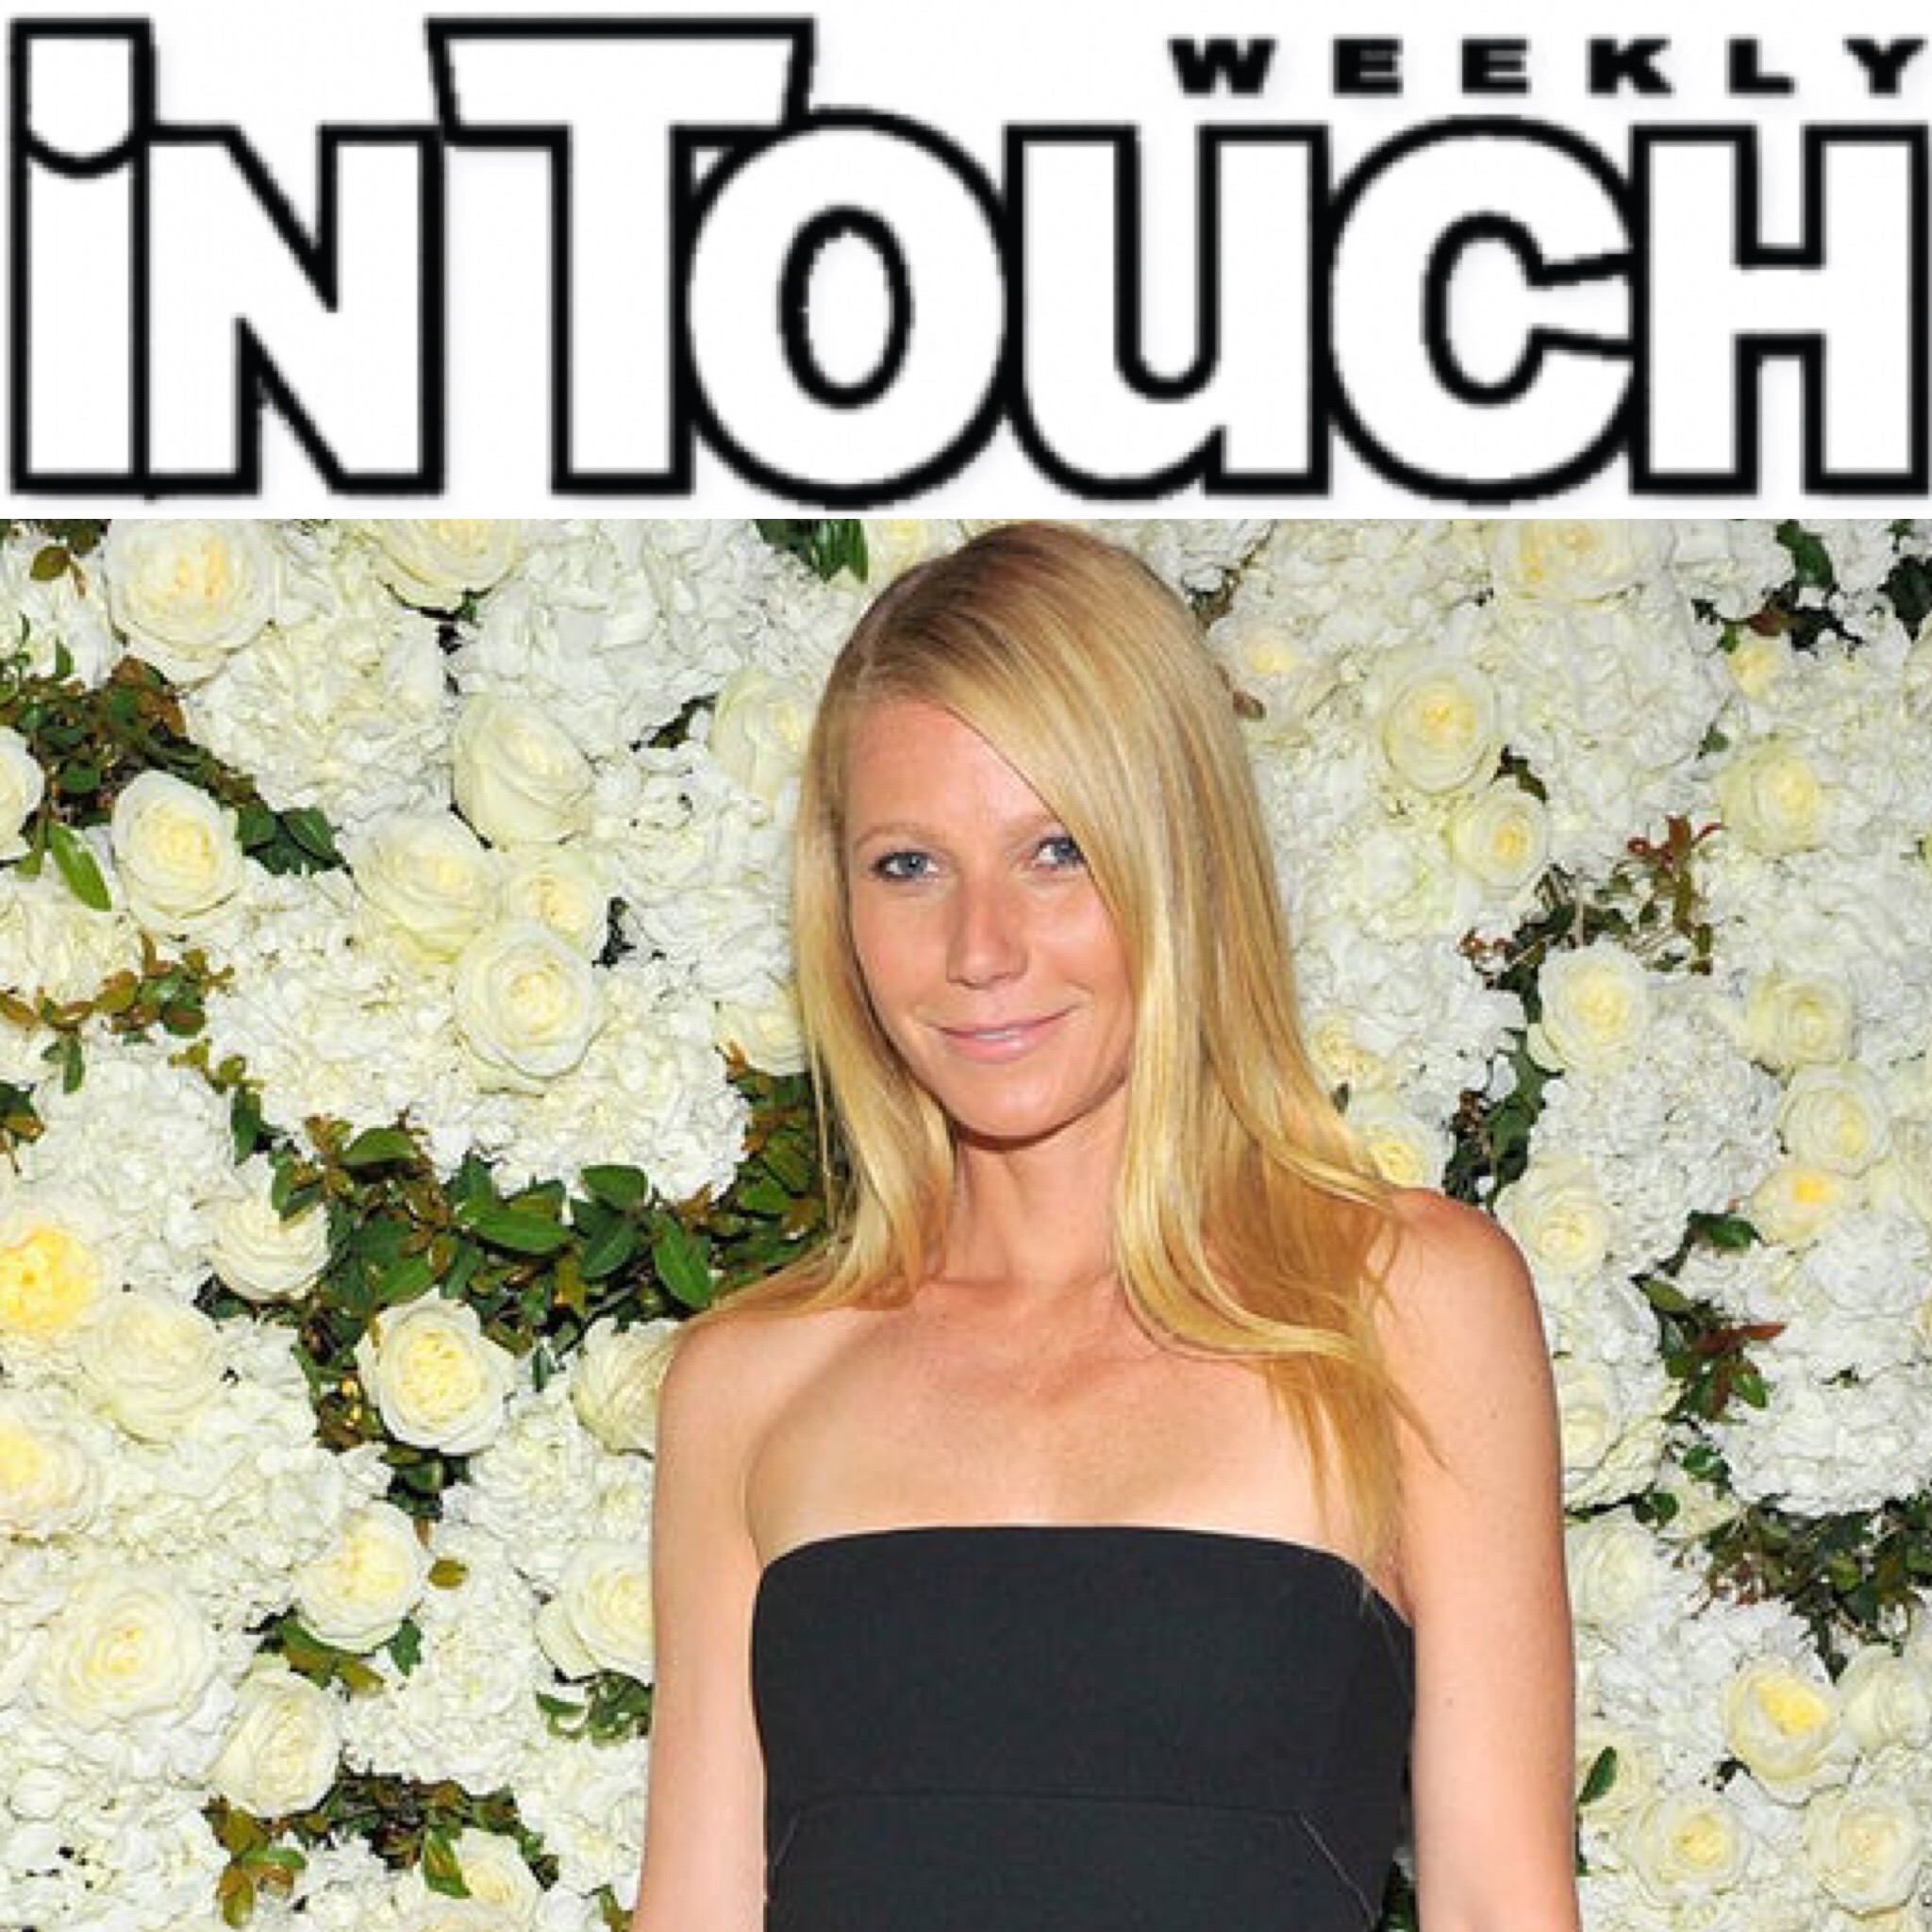  http://www.intouchweekly.com/posts/gwyneth-paltrow-only-lasted-4-days-out-of-her-1-week-food-stamp-challenge-56367 